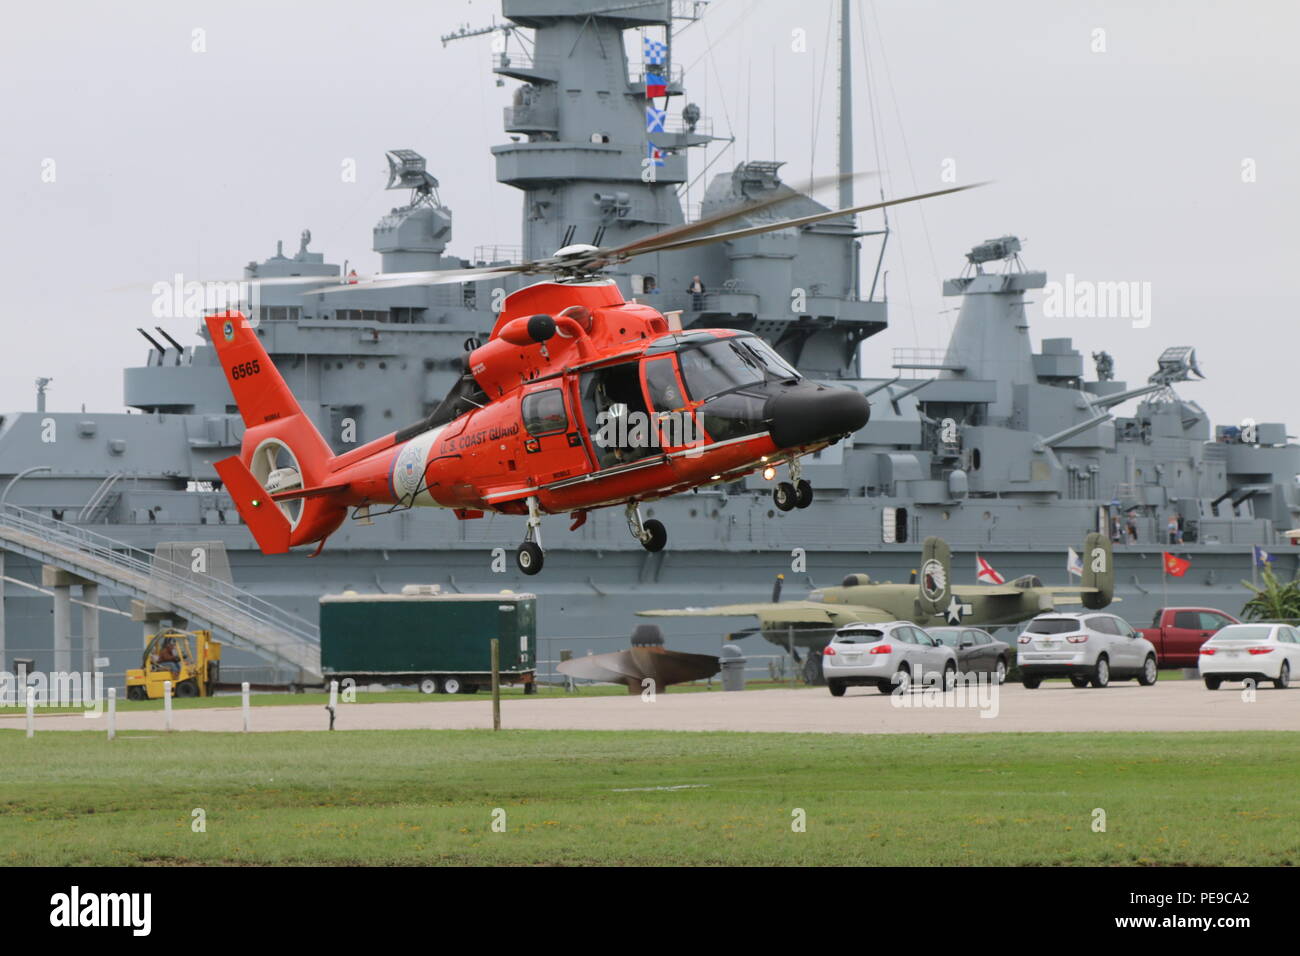 An ATC Mobile MH-65 Dolphin helicopter crew landed at the USS Alabama Battleship Memorial Park for the Fallen Guardians Monument ceremony Nov. 10, 2015. The monument is in honor of Coast Guardsmen that lost their lives serving in Alabama. (U.S. Coast Guard photo by Lt. Jacob Scritchfield) Stock Photo